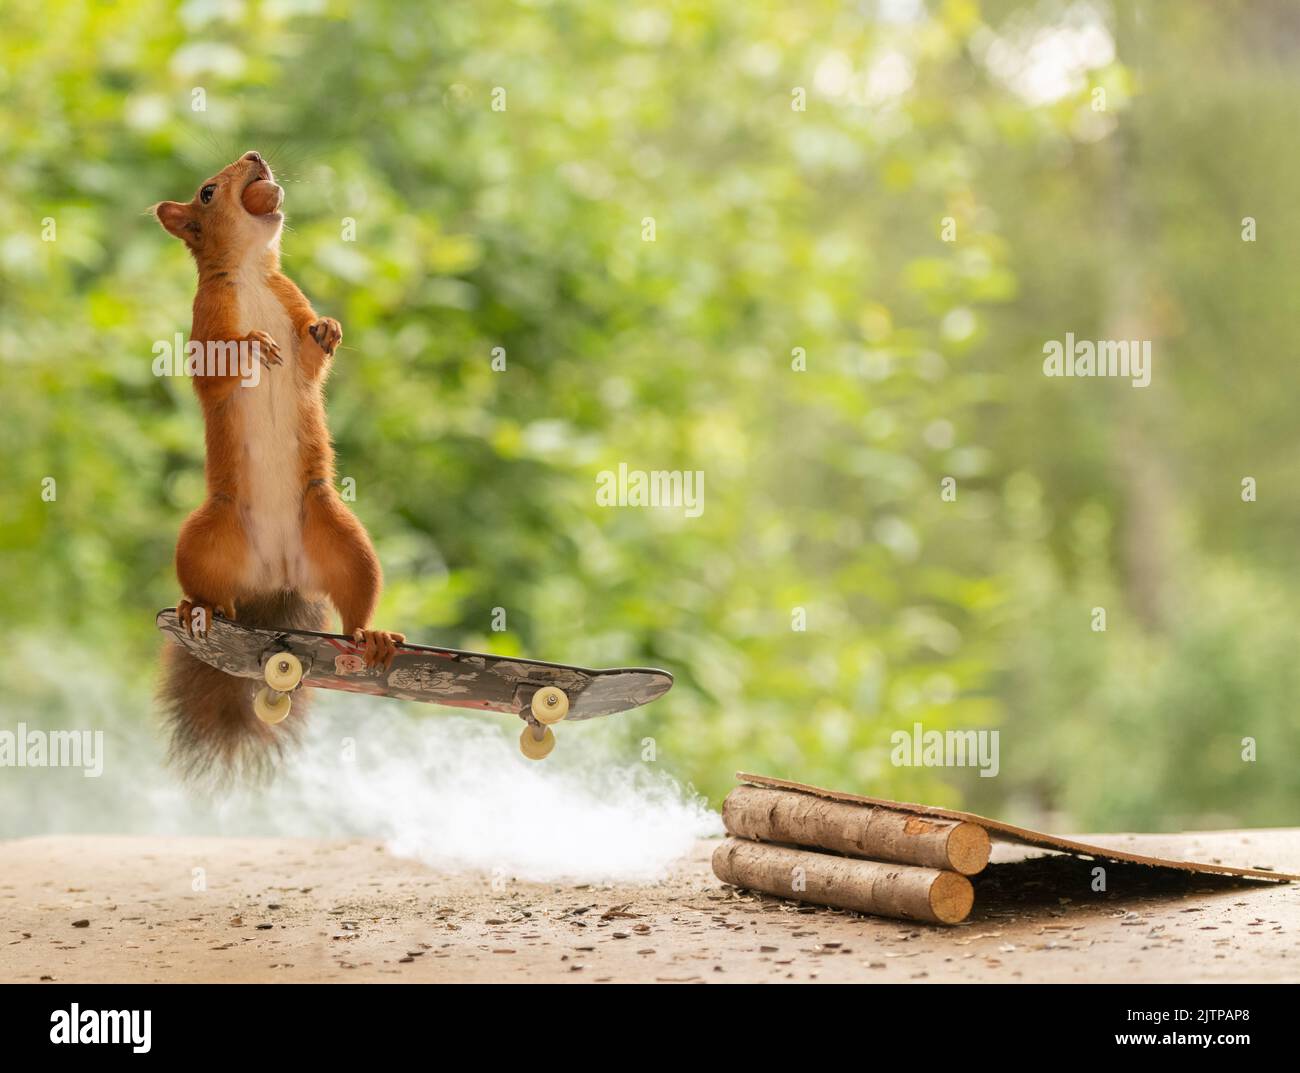 red squirrel is standing on an Skateboard Stock Photo